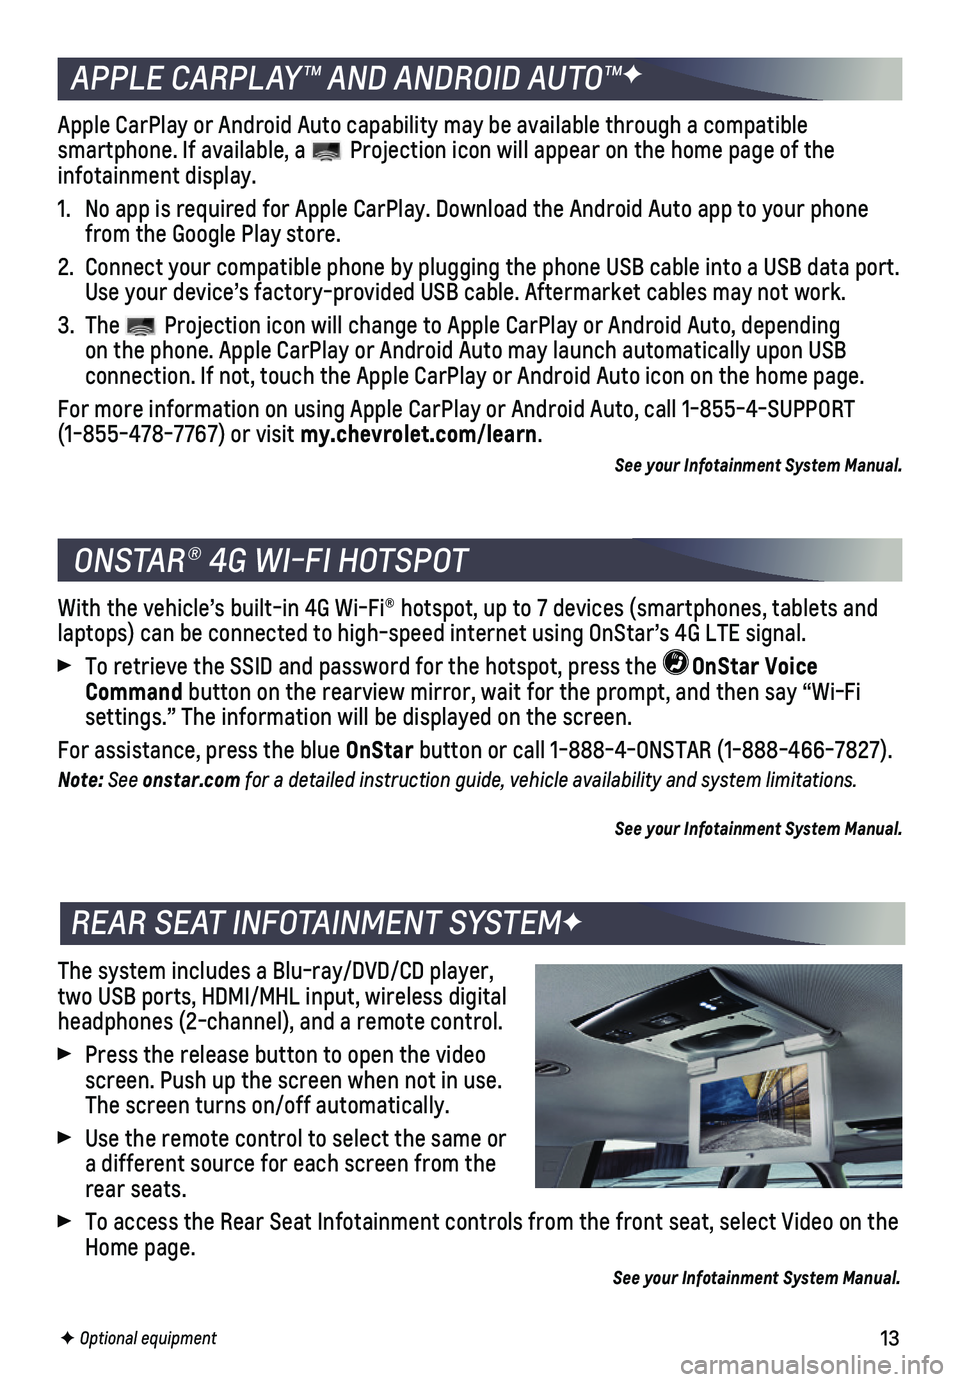 CHEVROLET SUBURBAN 2018  Get To Know Guide 13
The system includes a Blu-ray/DVD/CD player, two USB ports, HDMI/MHL input, wireless digital headphones (2-channel), and a remote control.
 Press the release button to open the video screen. Push u